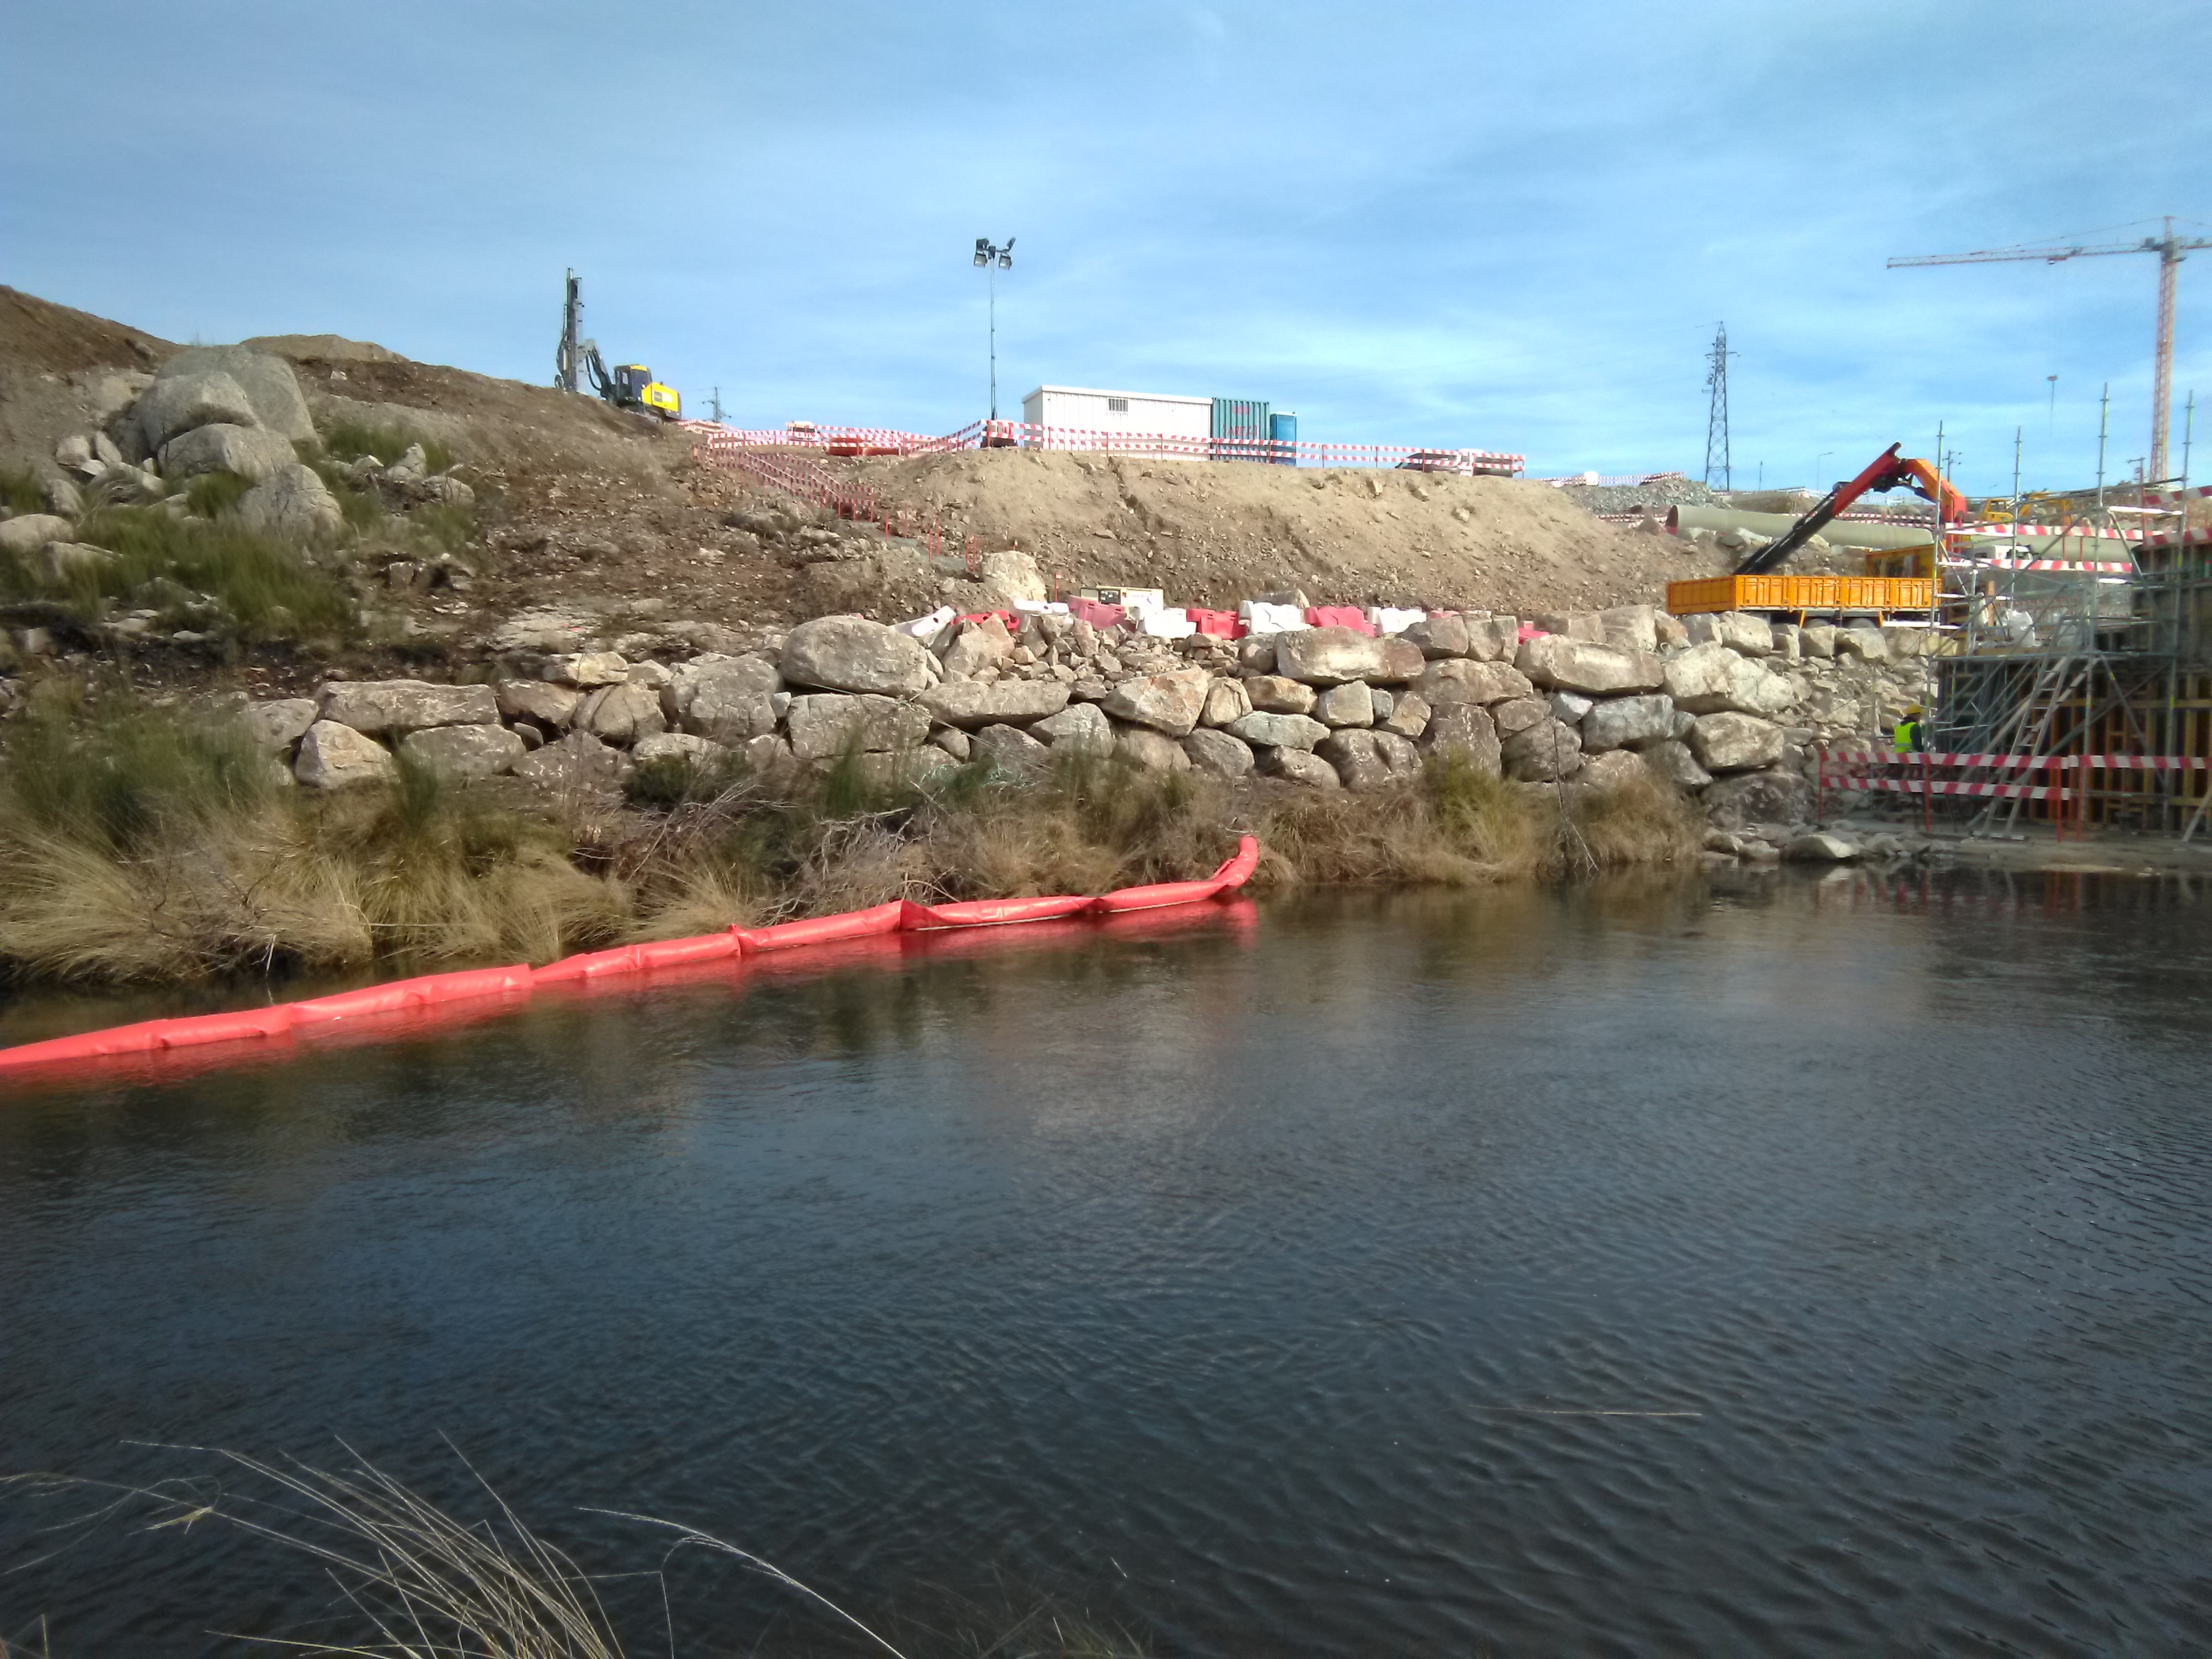 The geotextile barrier retains particulate matter around the worksite